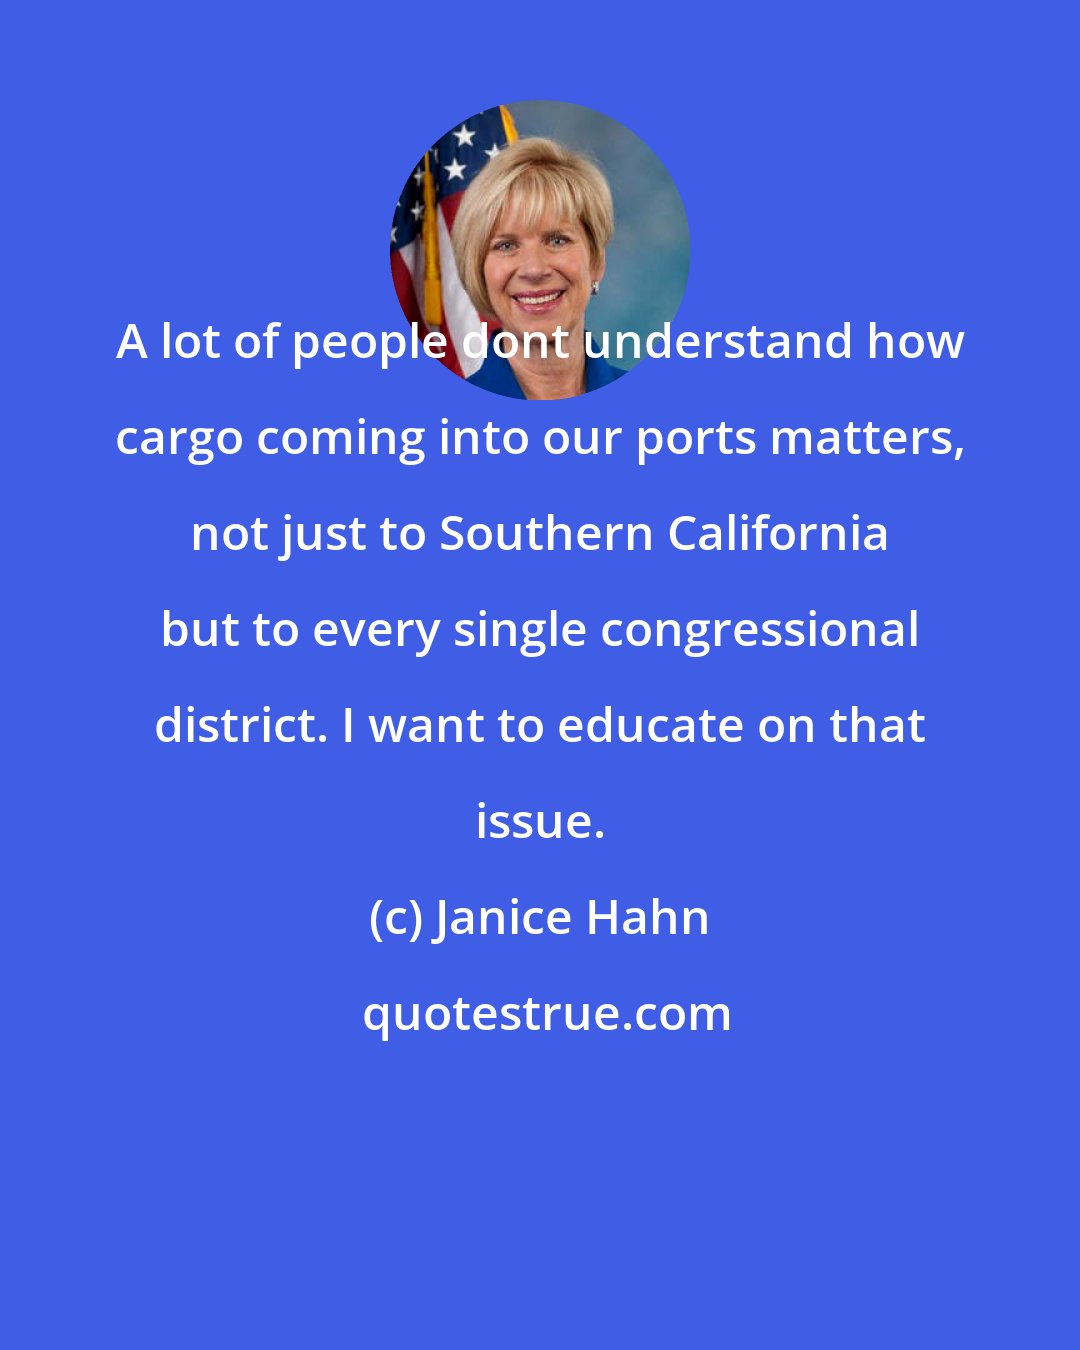 Janice Hahn: A lot of people dont understand how cargo coming into our ports matters, not just to Southern California but to every single congressional district. I want to educate on that issue.